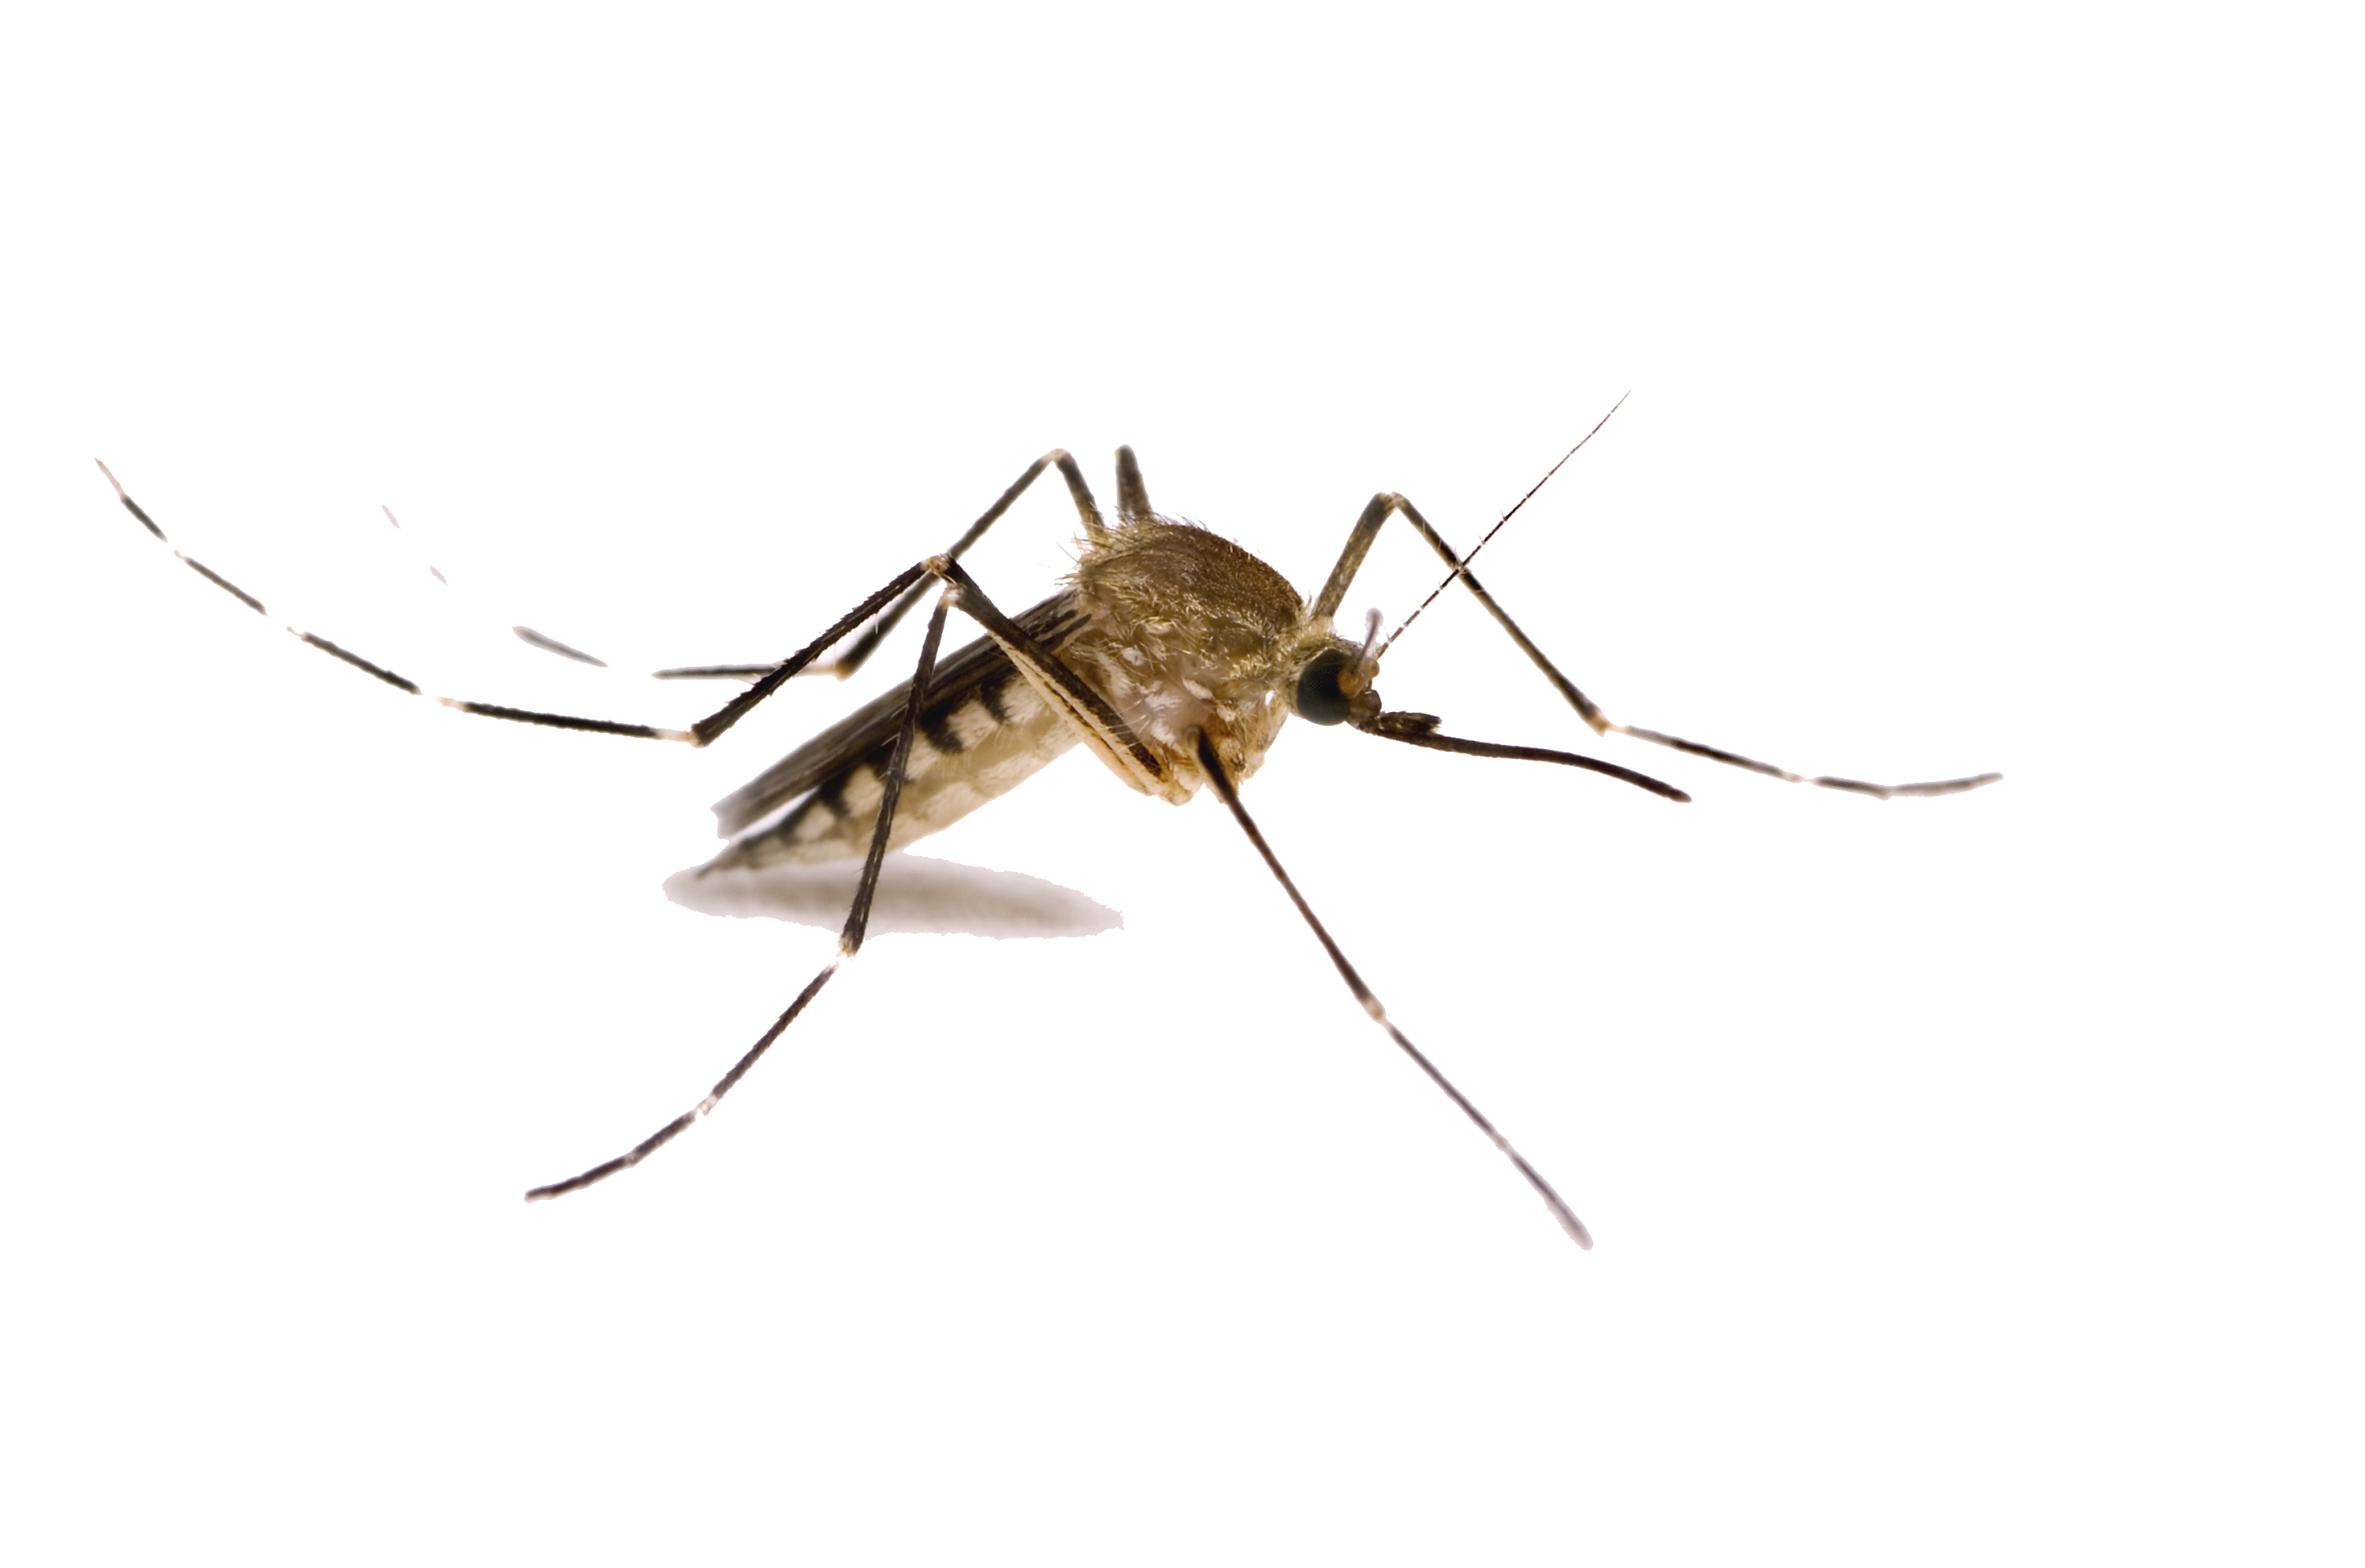 Png transparent images all. Mosquito clipart annoying fly